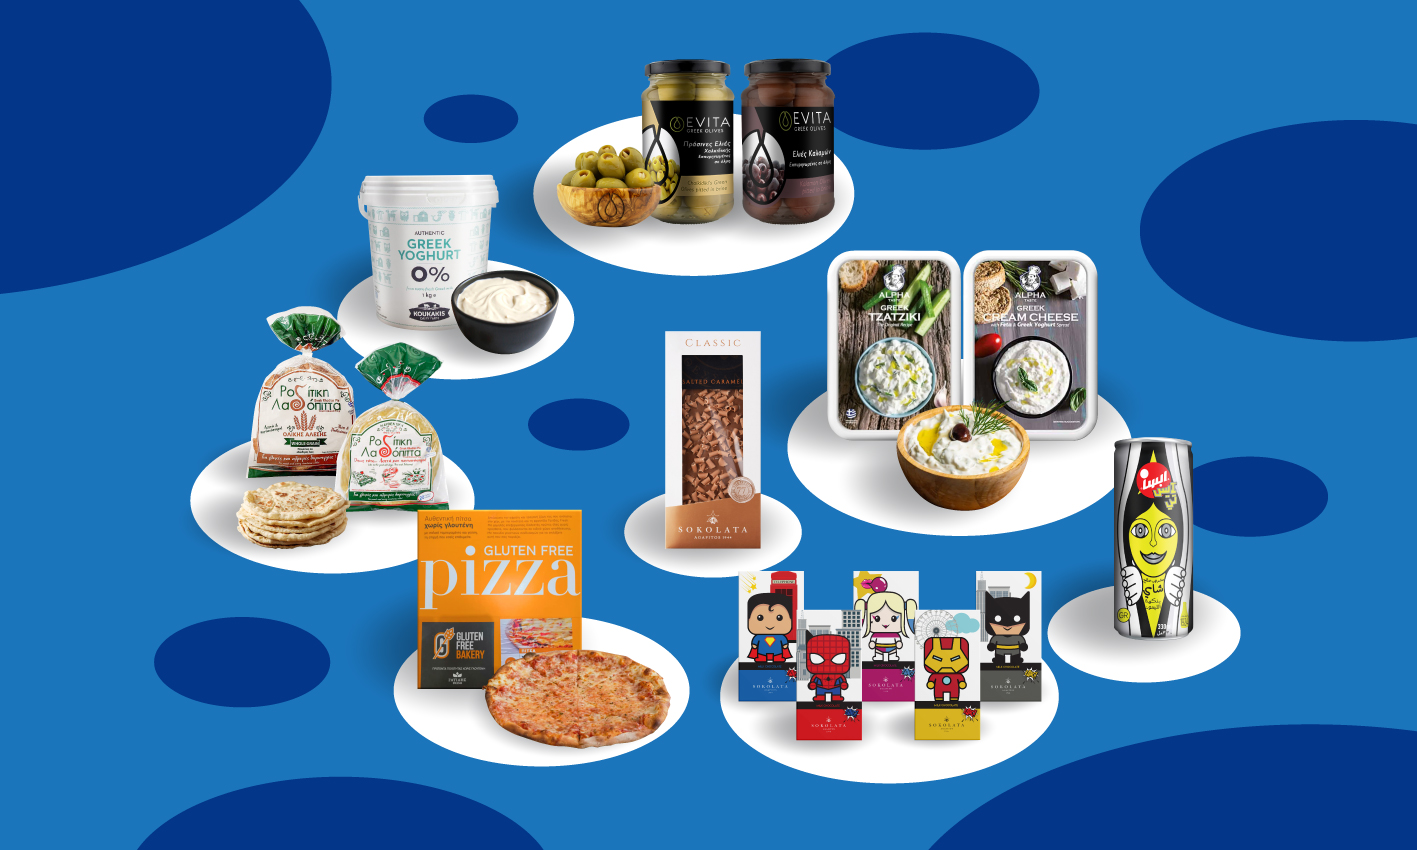 Epicurean Products from Greece